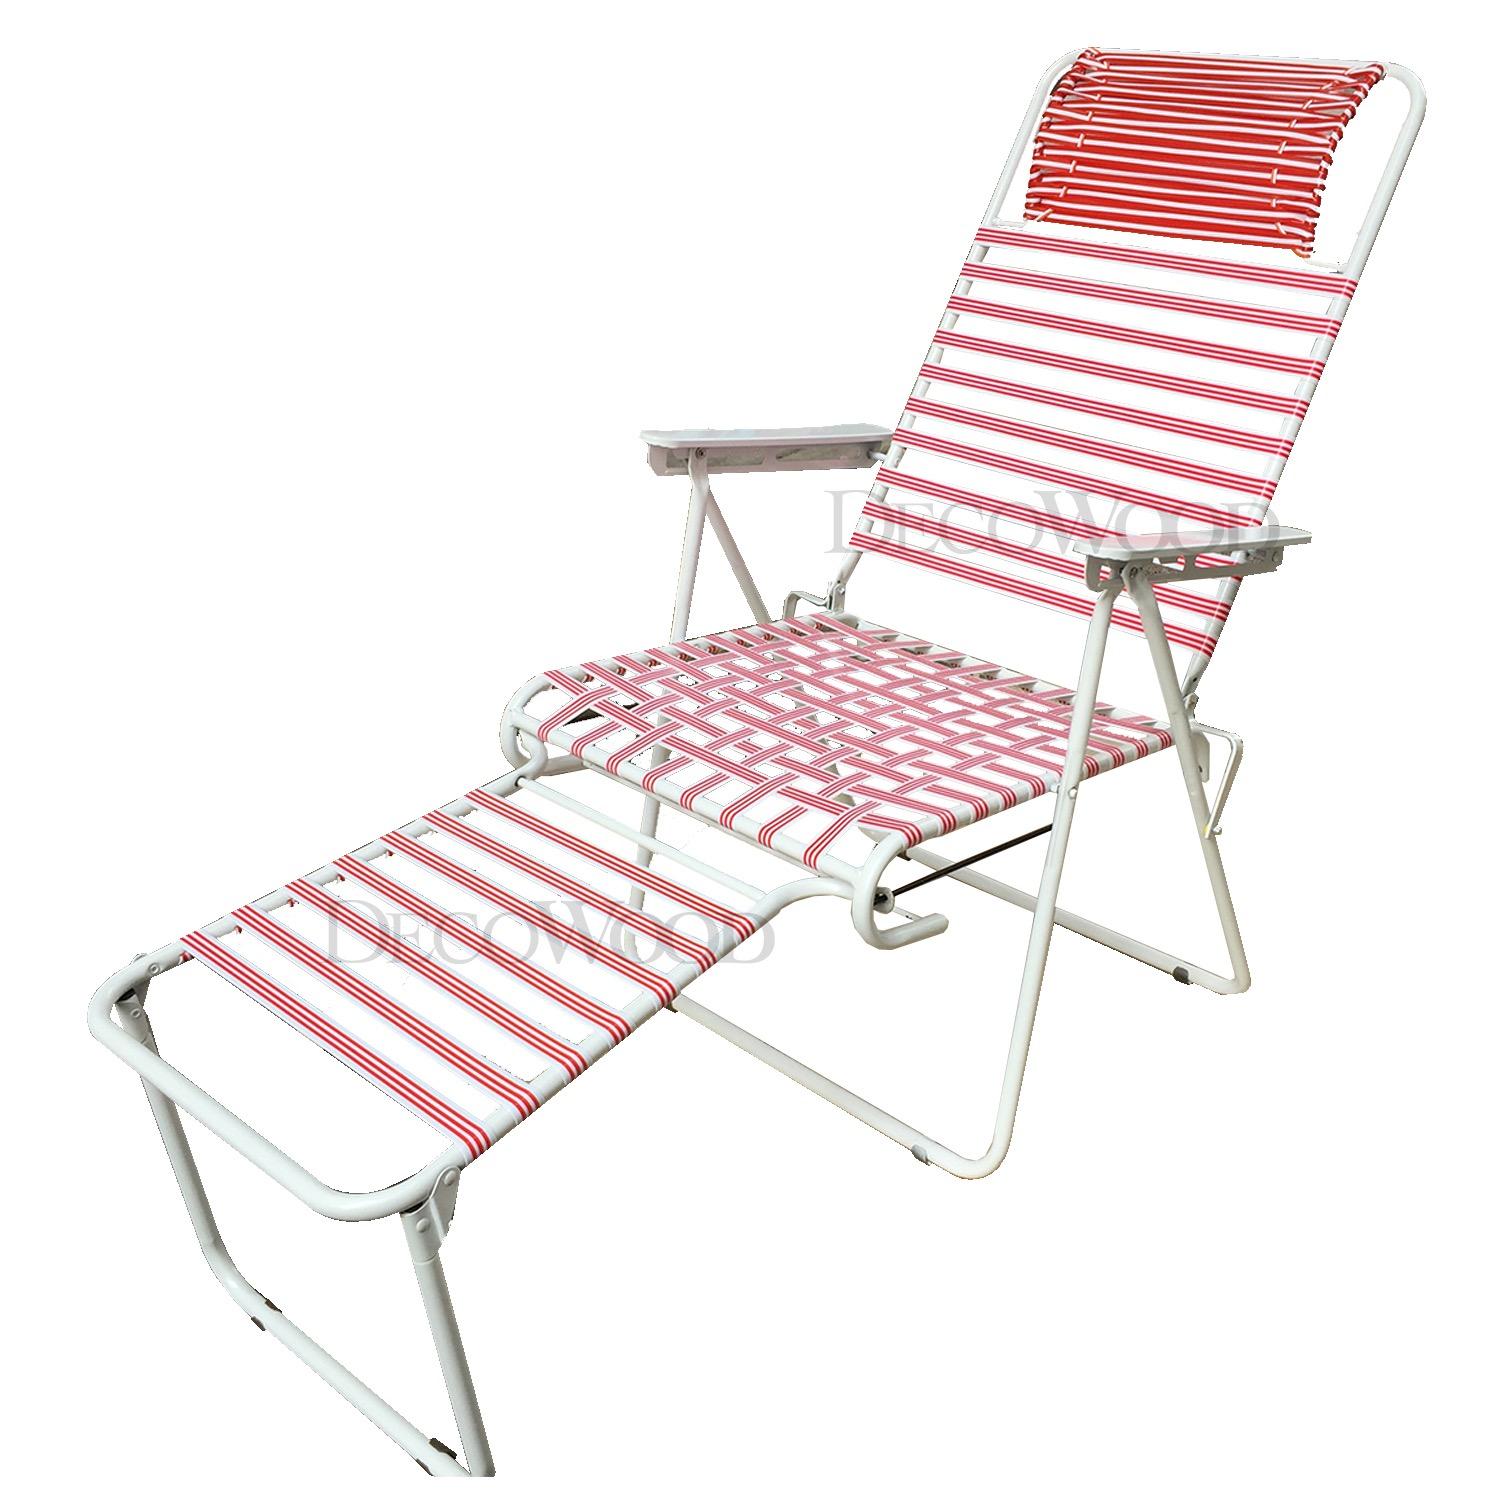 Ready-Fixed Relax Lazy Chair/Nap Ch (end 4/28/2021 12:00 AM)